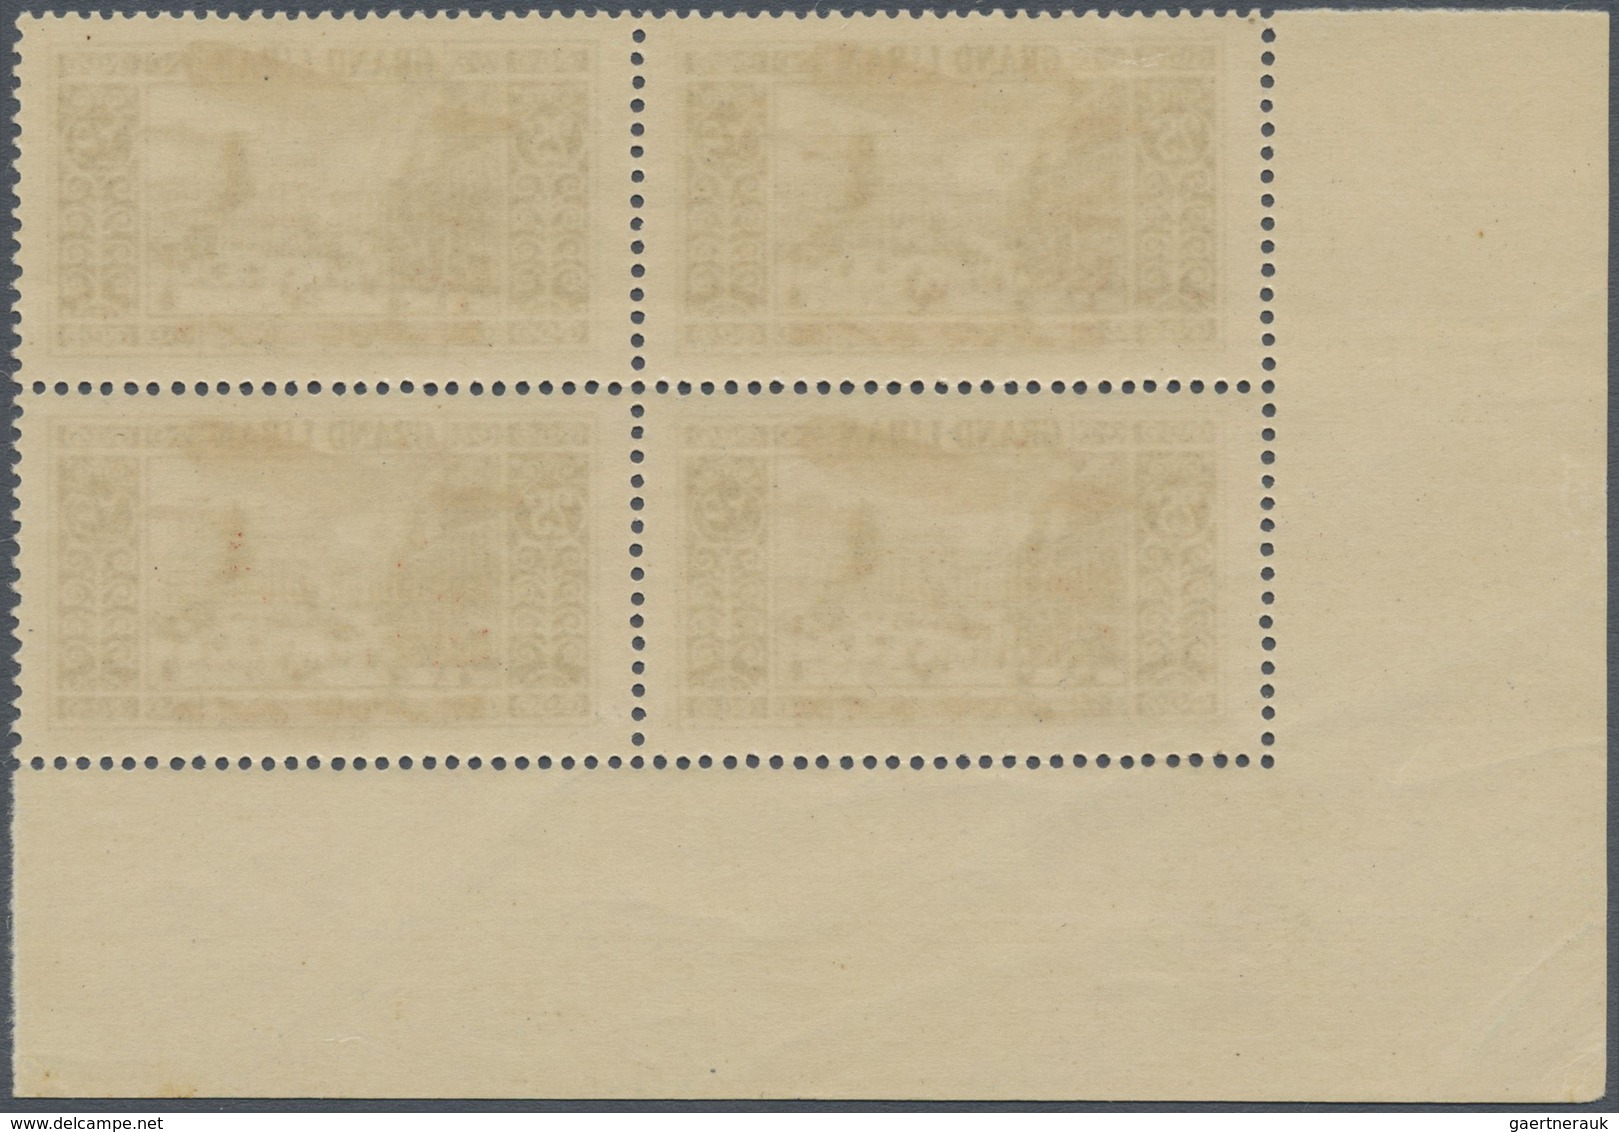 ** Libanon: 1929, Airmails, 25pi. Ultramarine, Marginal Block Of Four From The Lower Left Corner Of The - Libanon